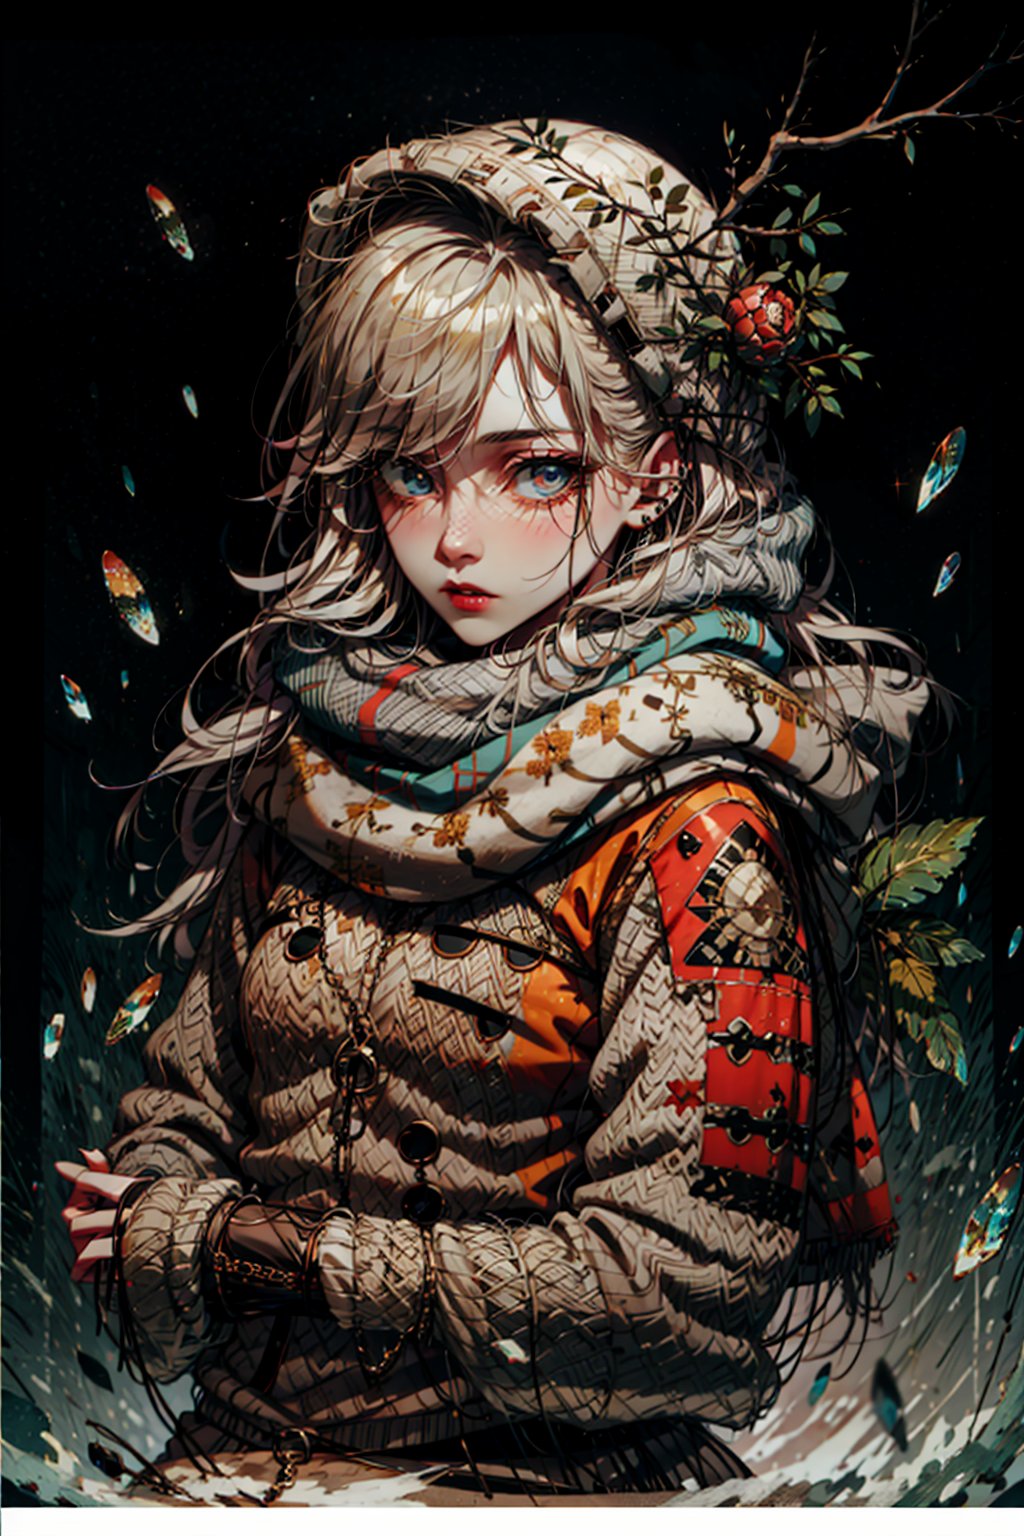 Masterpiece, Best Quality, High Resolution, Highly detailed, small teenage girl, DetailedFace, piercing blue eyes, glowing eyes, perfect eyes, voluminous ashblonde hair, hair over eyes, village girl, Budding breasts, Big oversized patchwork coat, grey winter coat, patches, dark blueish scarf, absurd res, winter, fantasy, 1900s train in background, somber atmosphere, Character design sheet